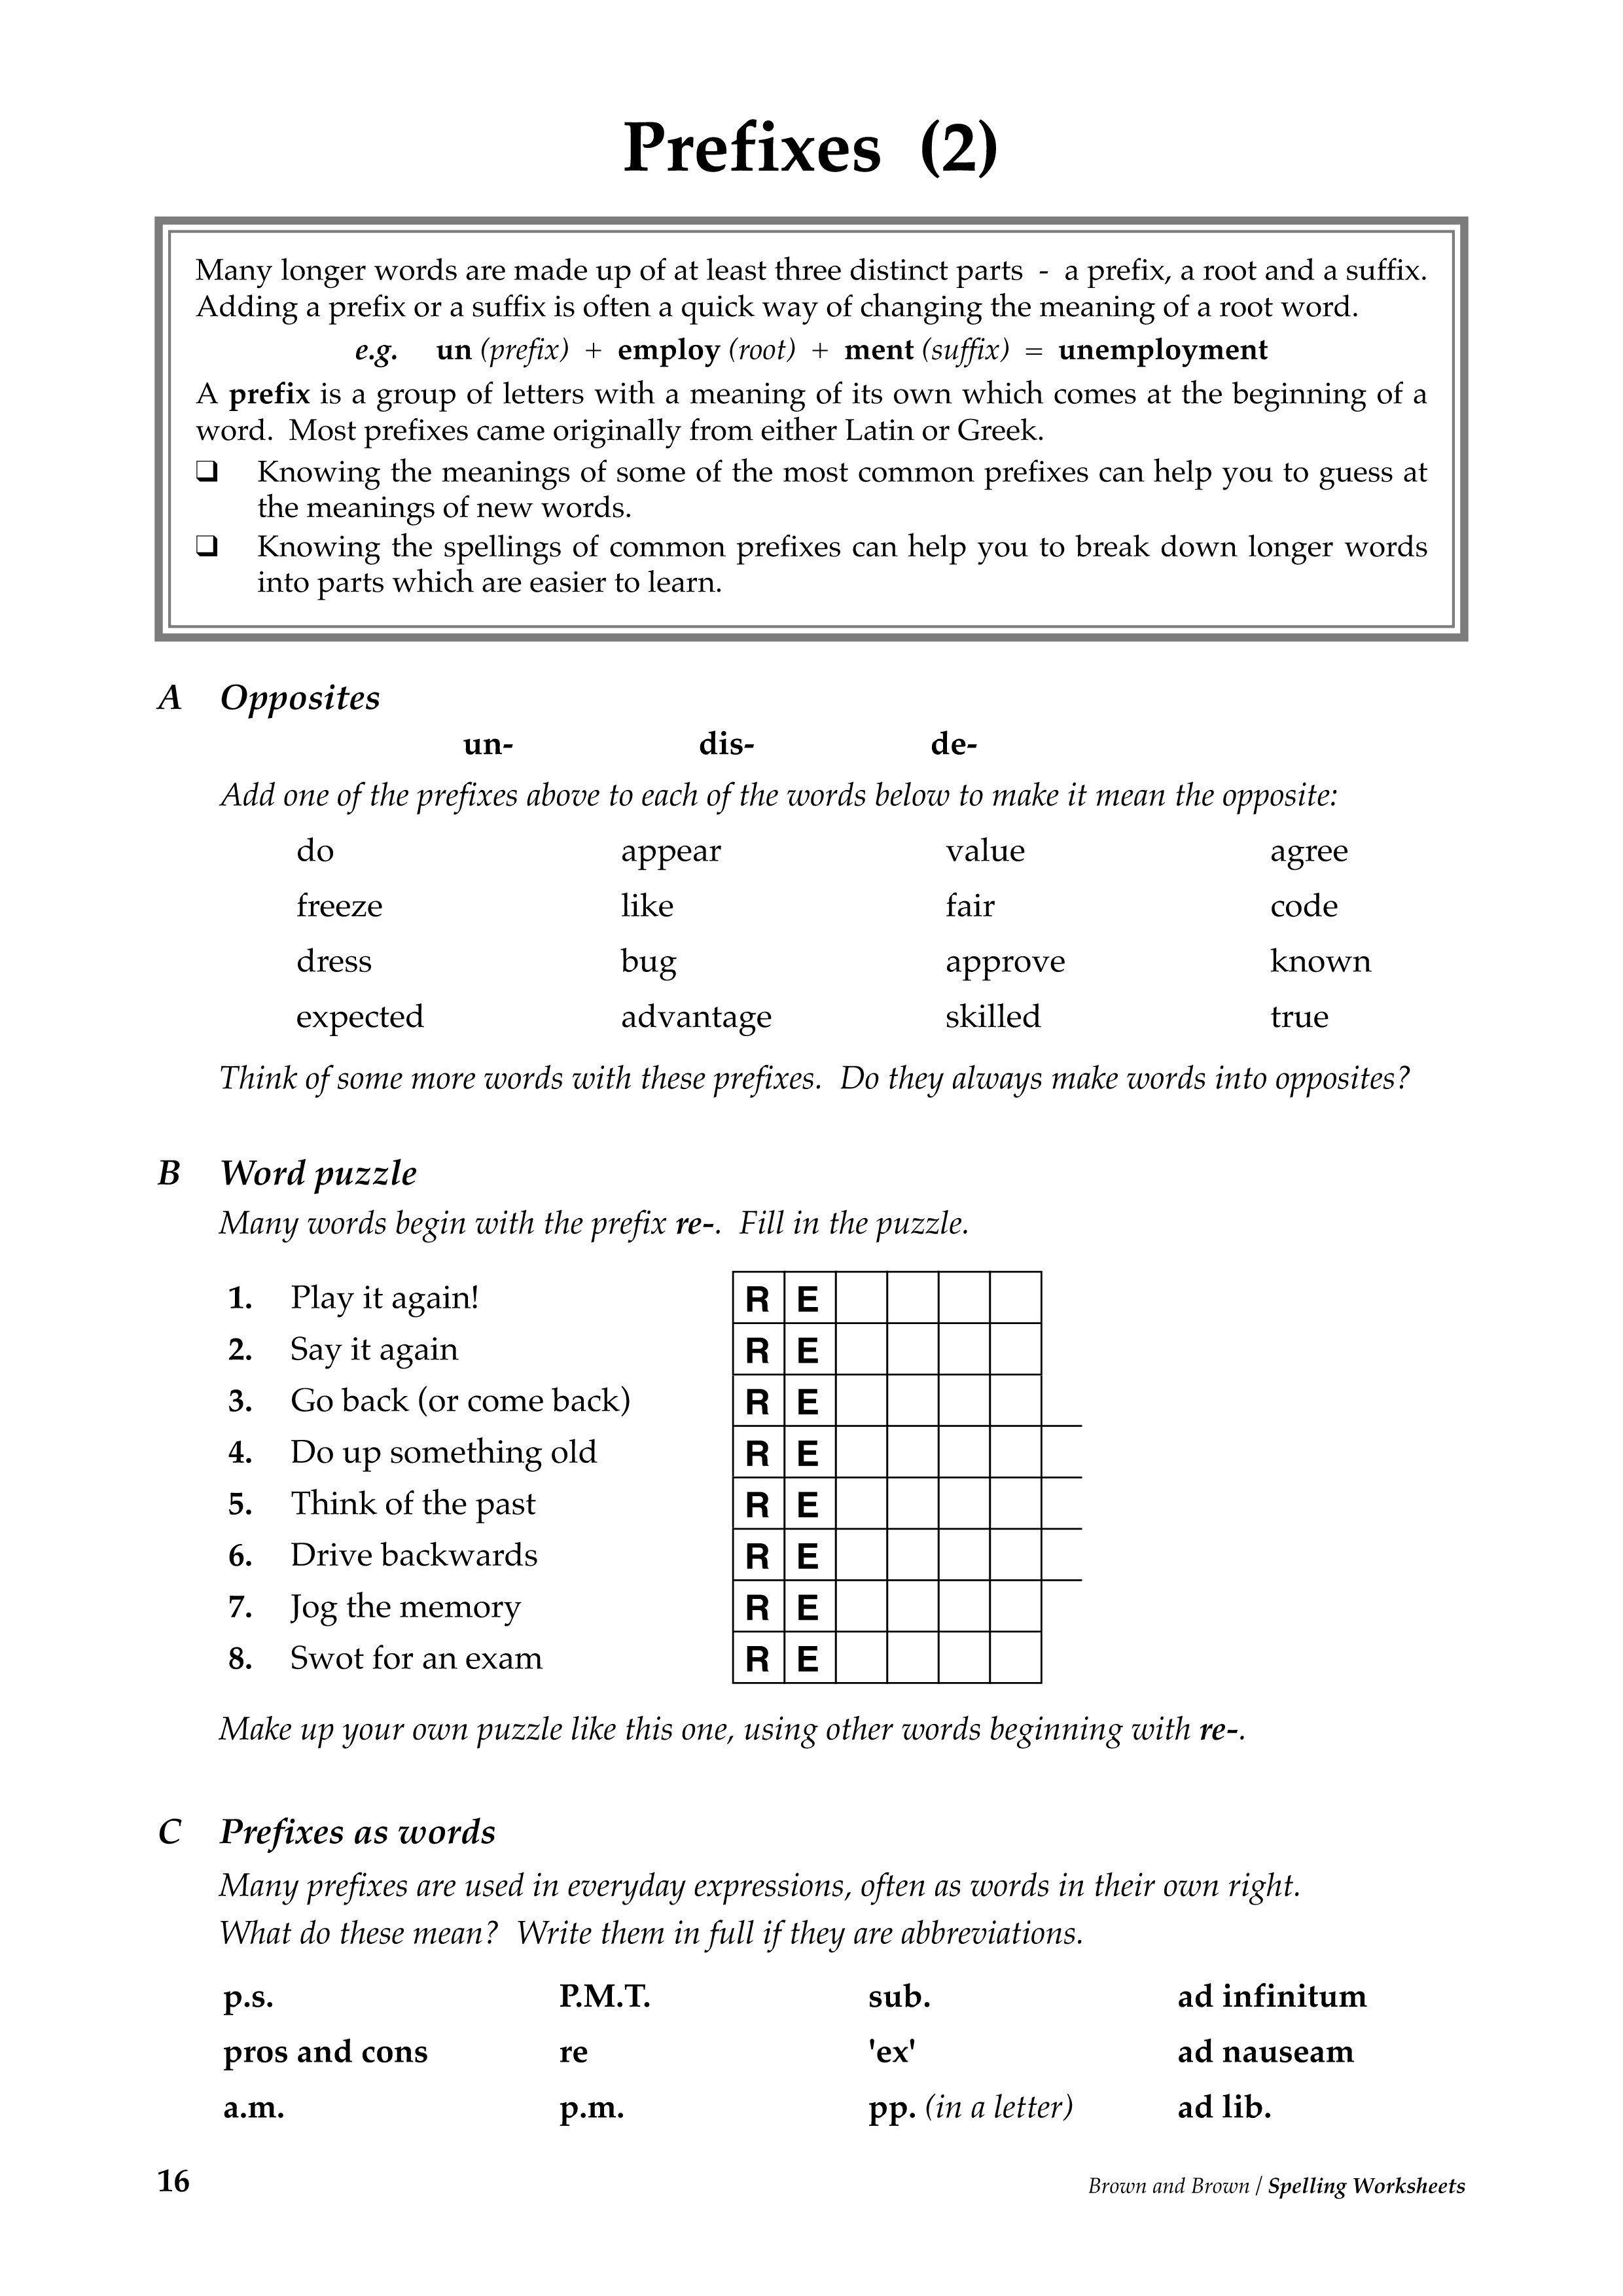 Spelling Worksheets | The Adult Literacy Specialist | Gatehouse Media - Free Printable Literacy Worksheets For Adults